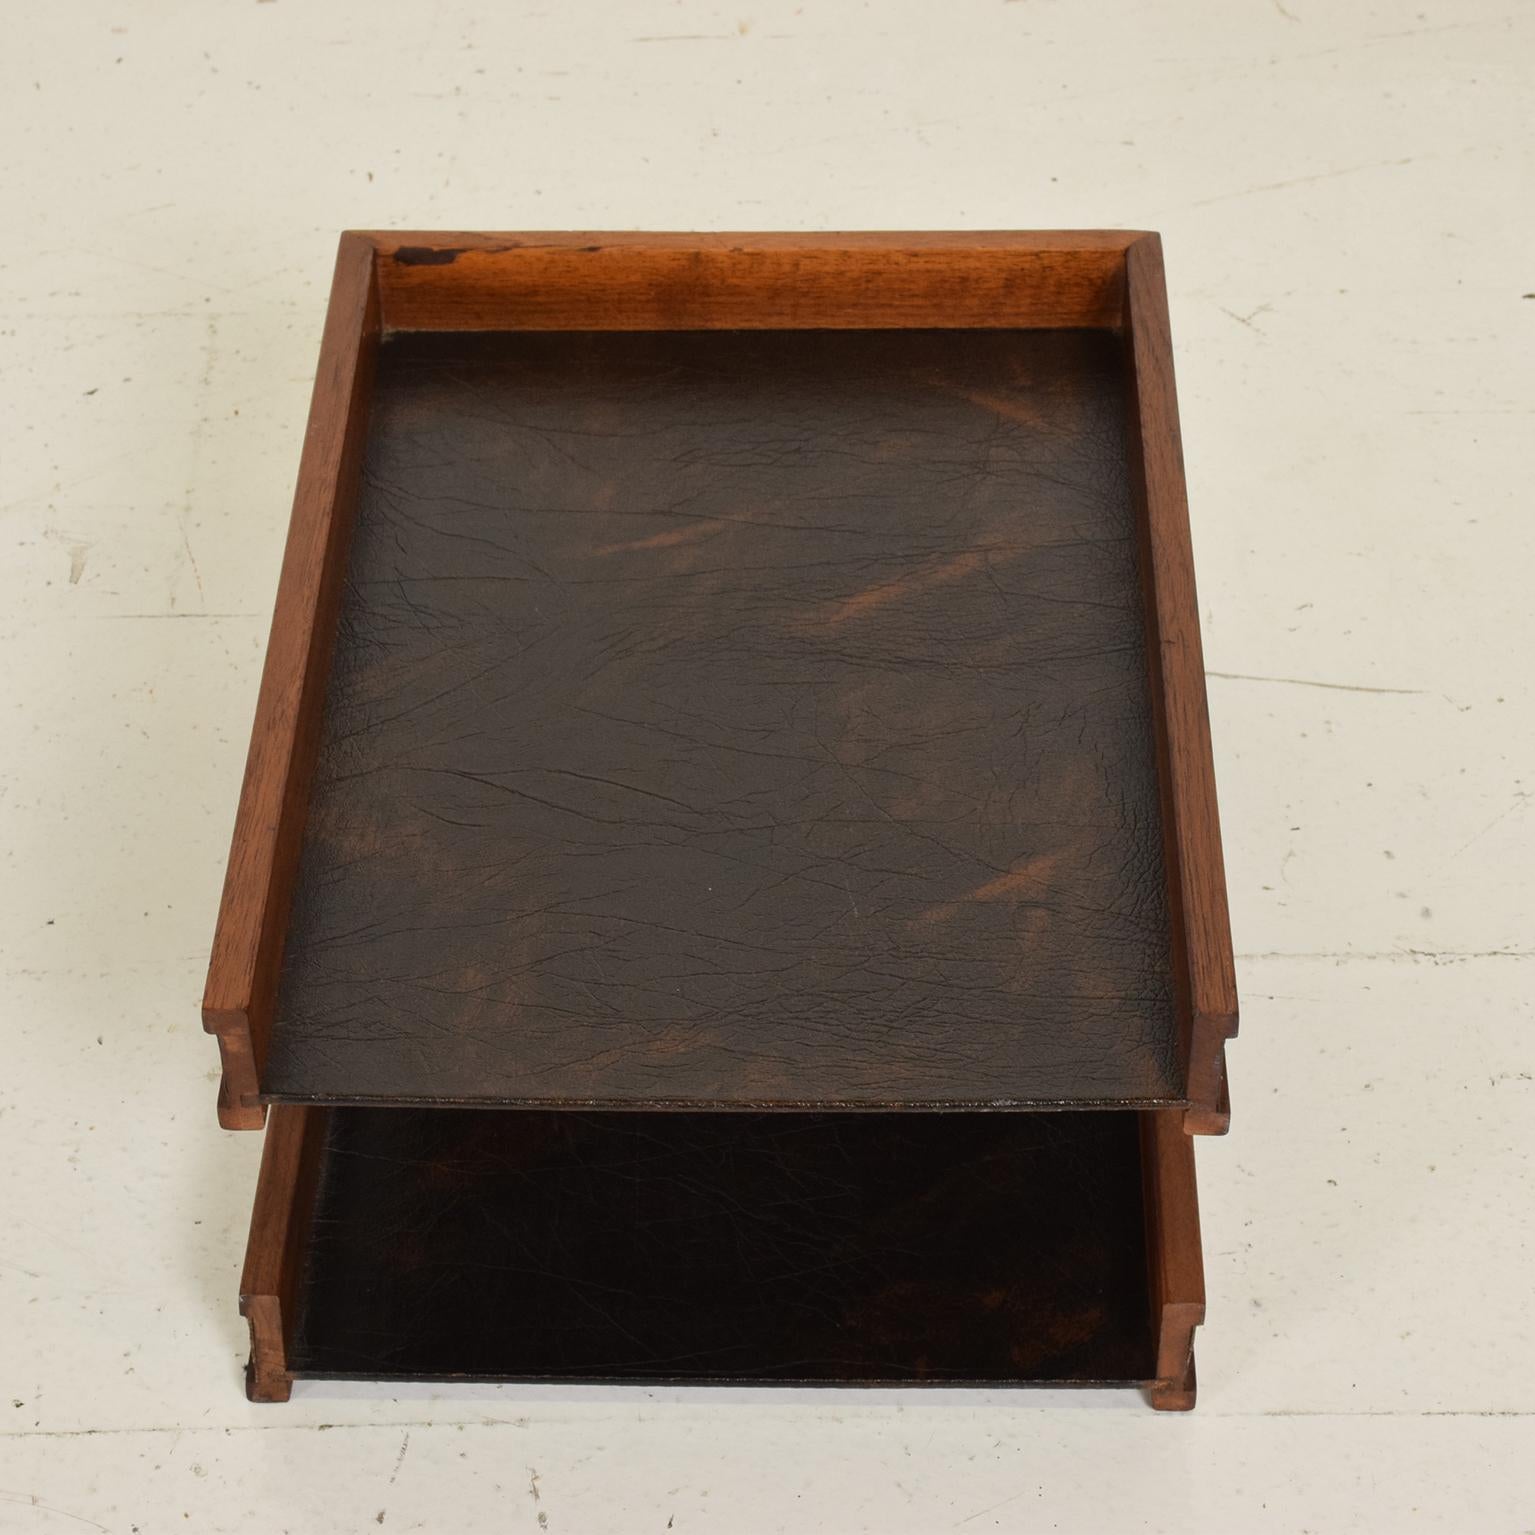 For your consideration, a Mid-Century Modern office tray accessories, wood and faux leather.

Unmarked, no information on the maker or designer. The USA, circa 1960s.

Constructed with wood, brown faux leather, and iron rods. 

Dimensions: 6